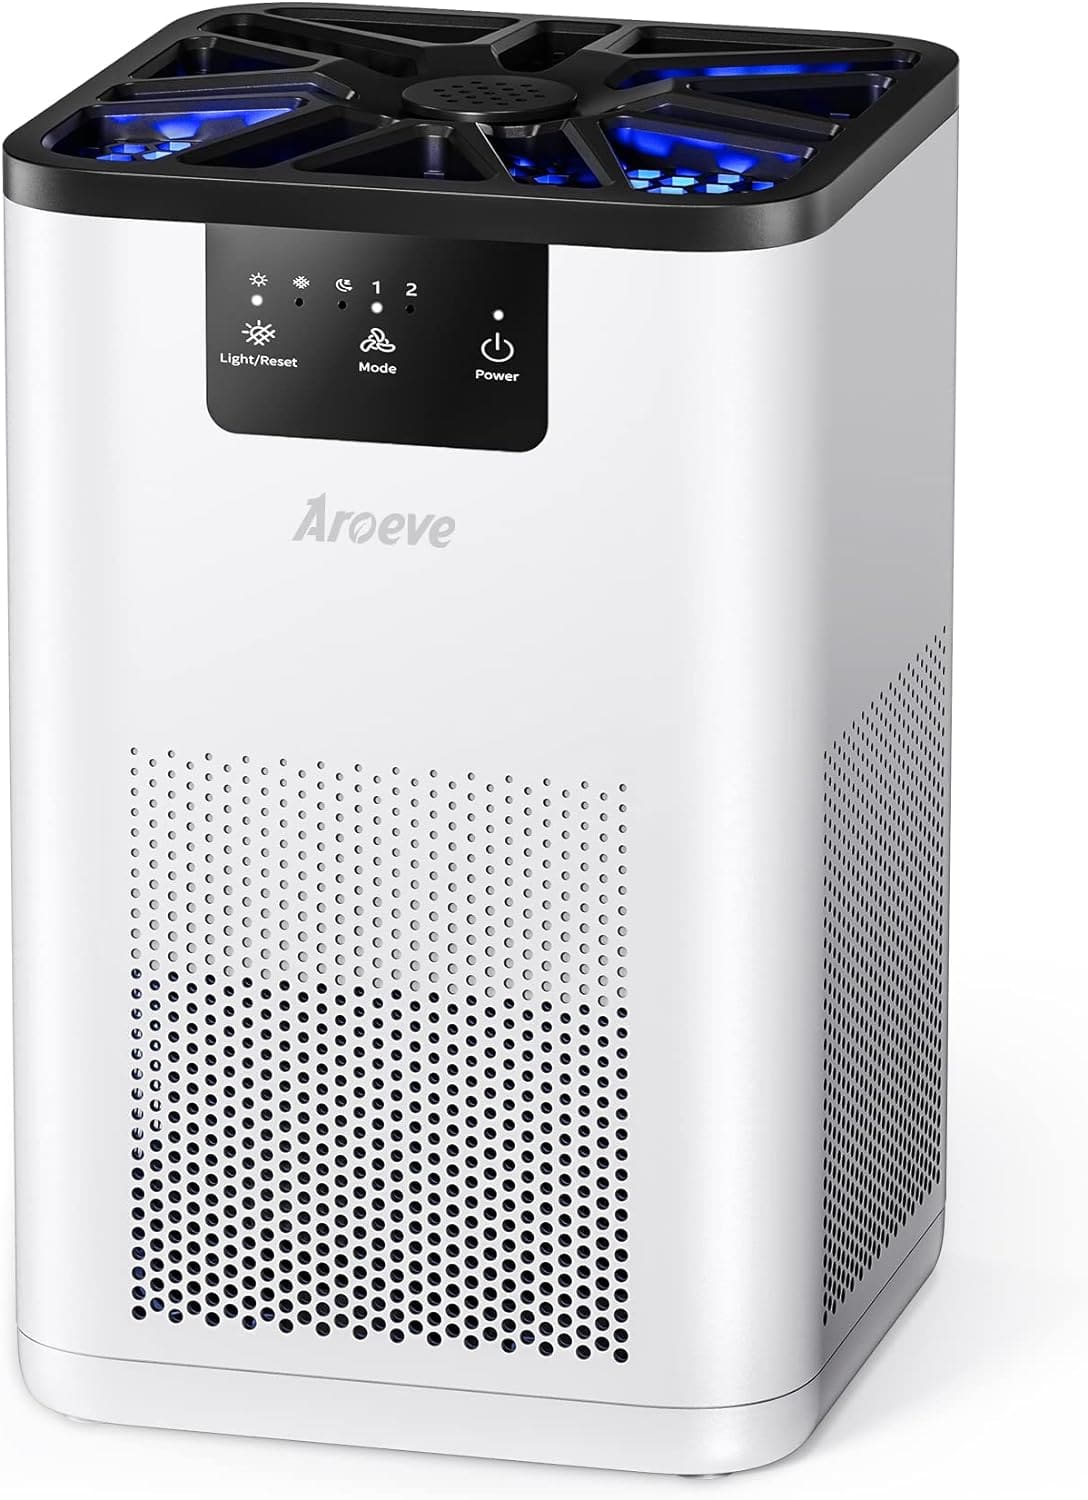 Aroeve air purifier review